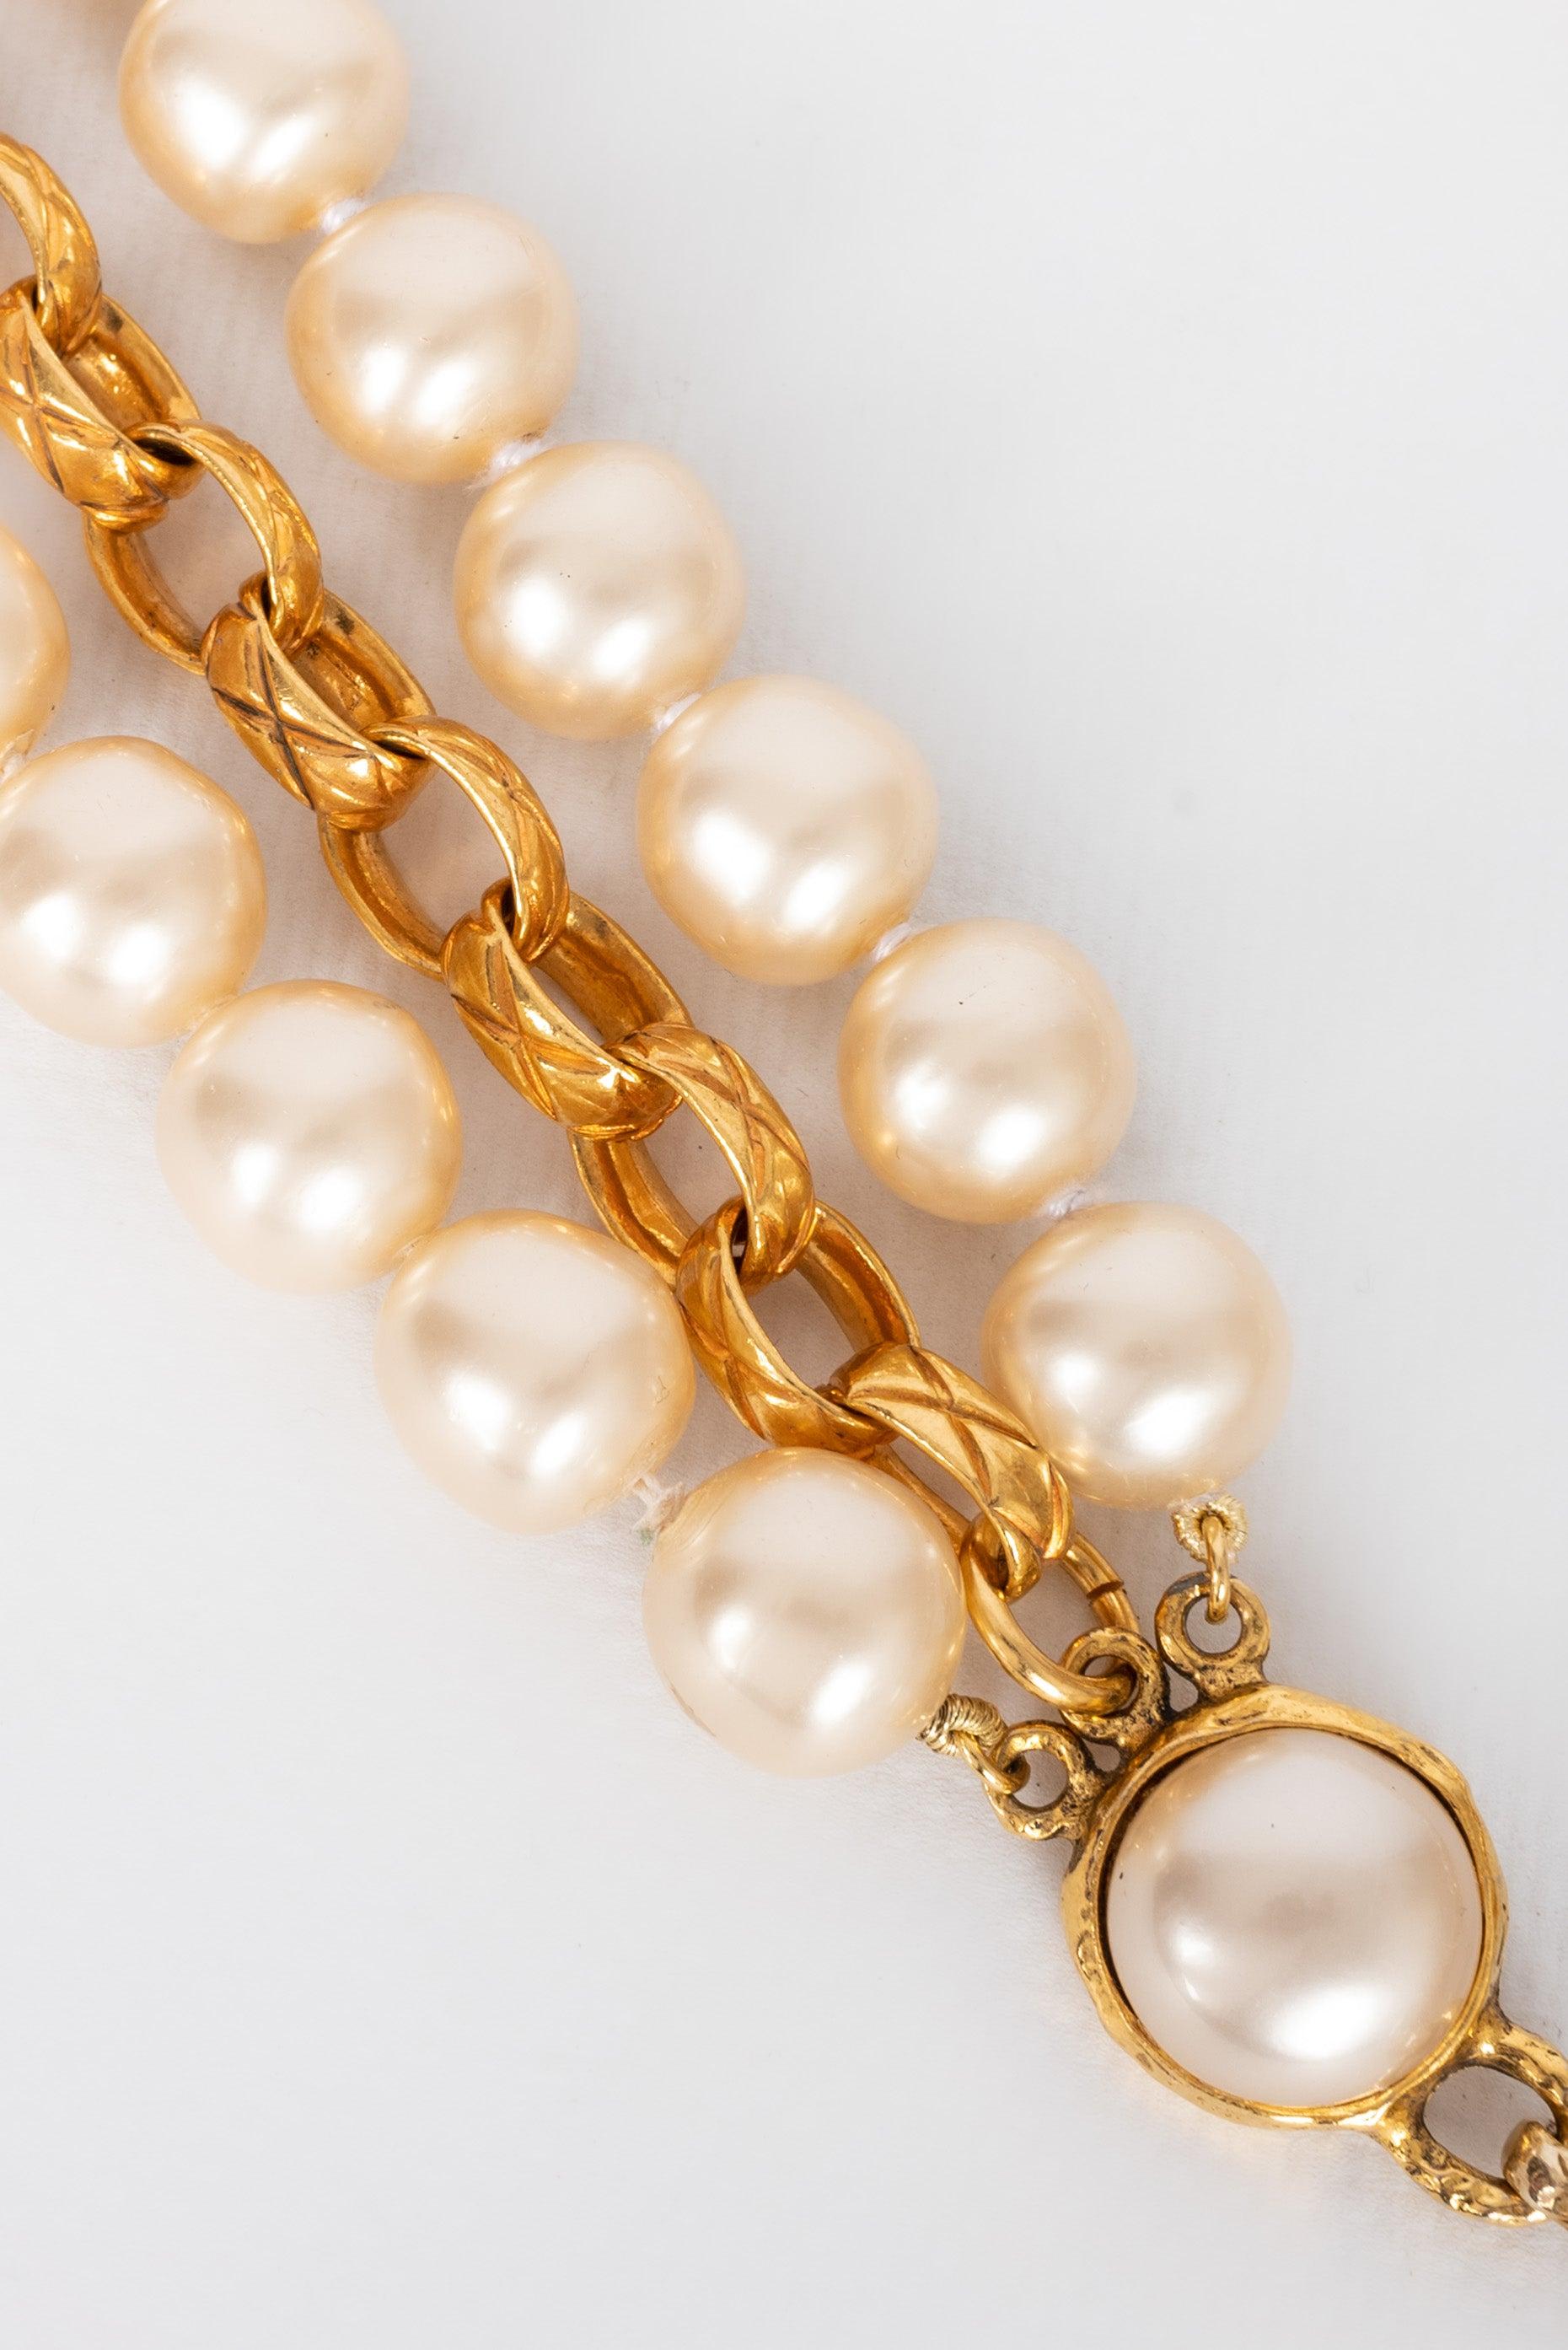 Chanel Necklace in Gold-Plated Metal and Costume Pearly Beads, 1990s For Sale 2